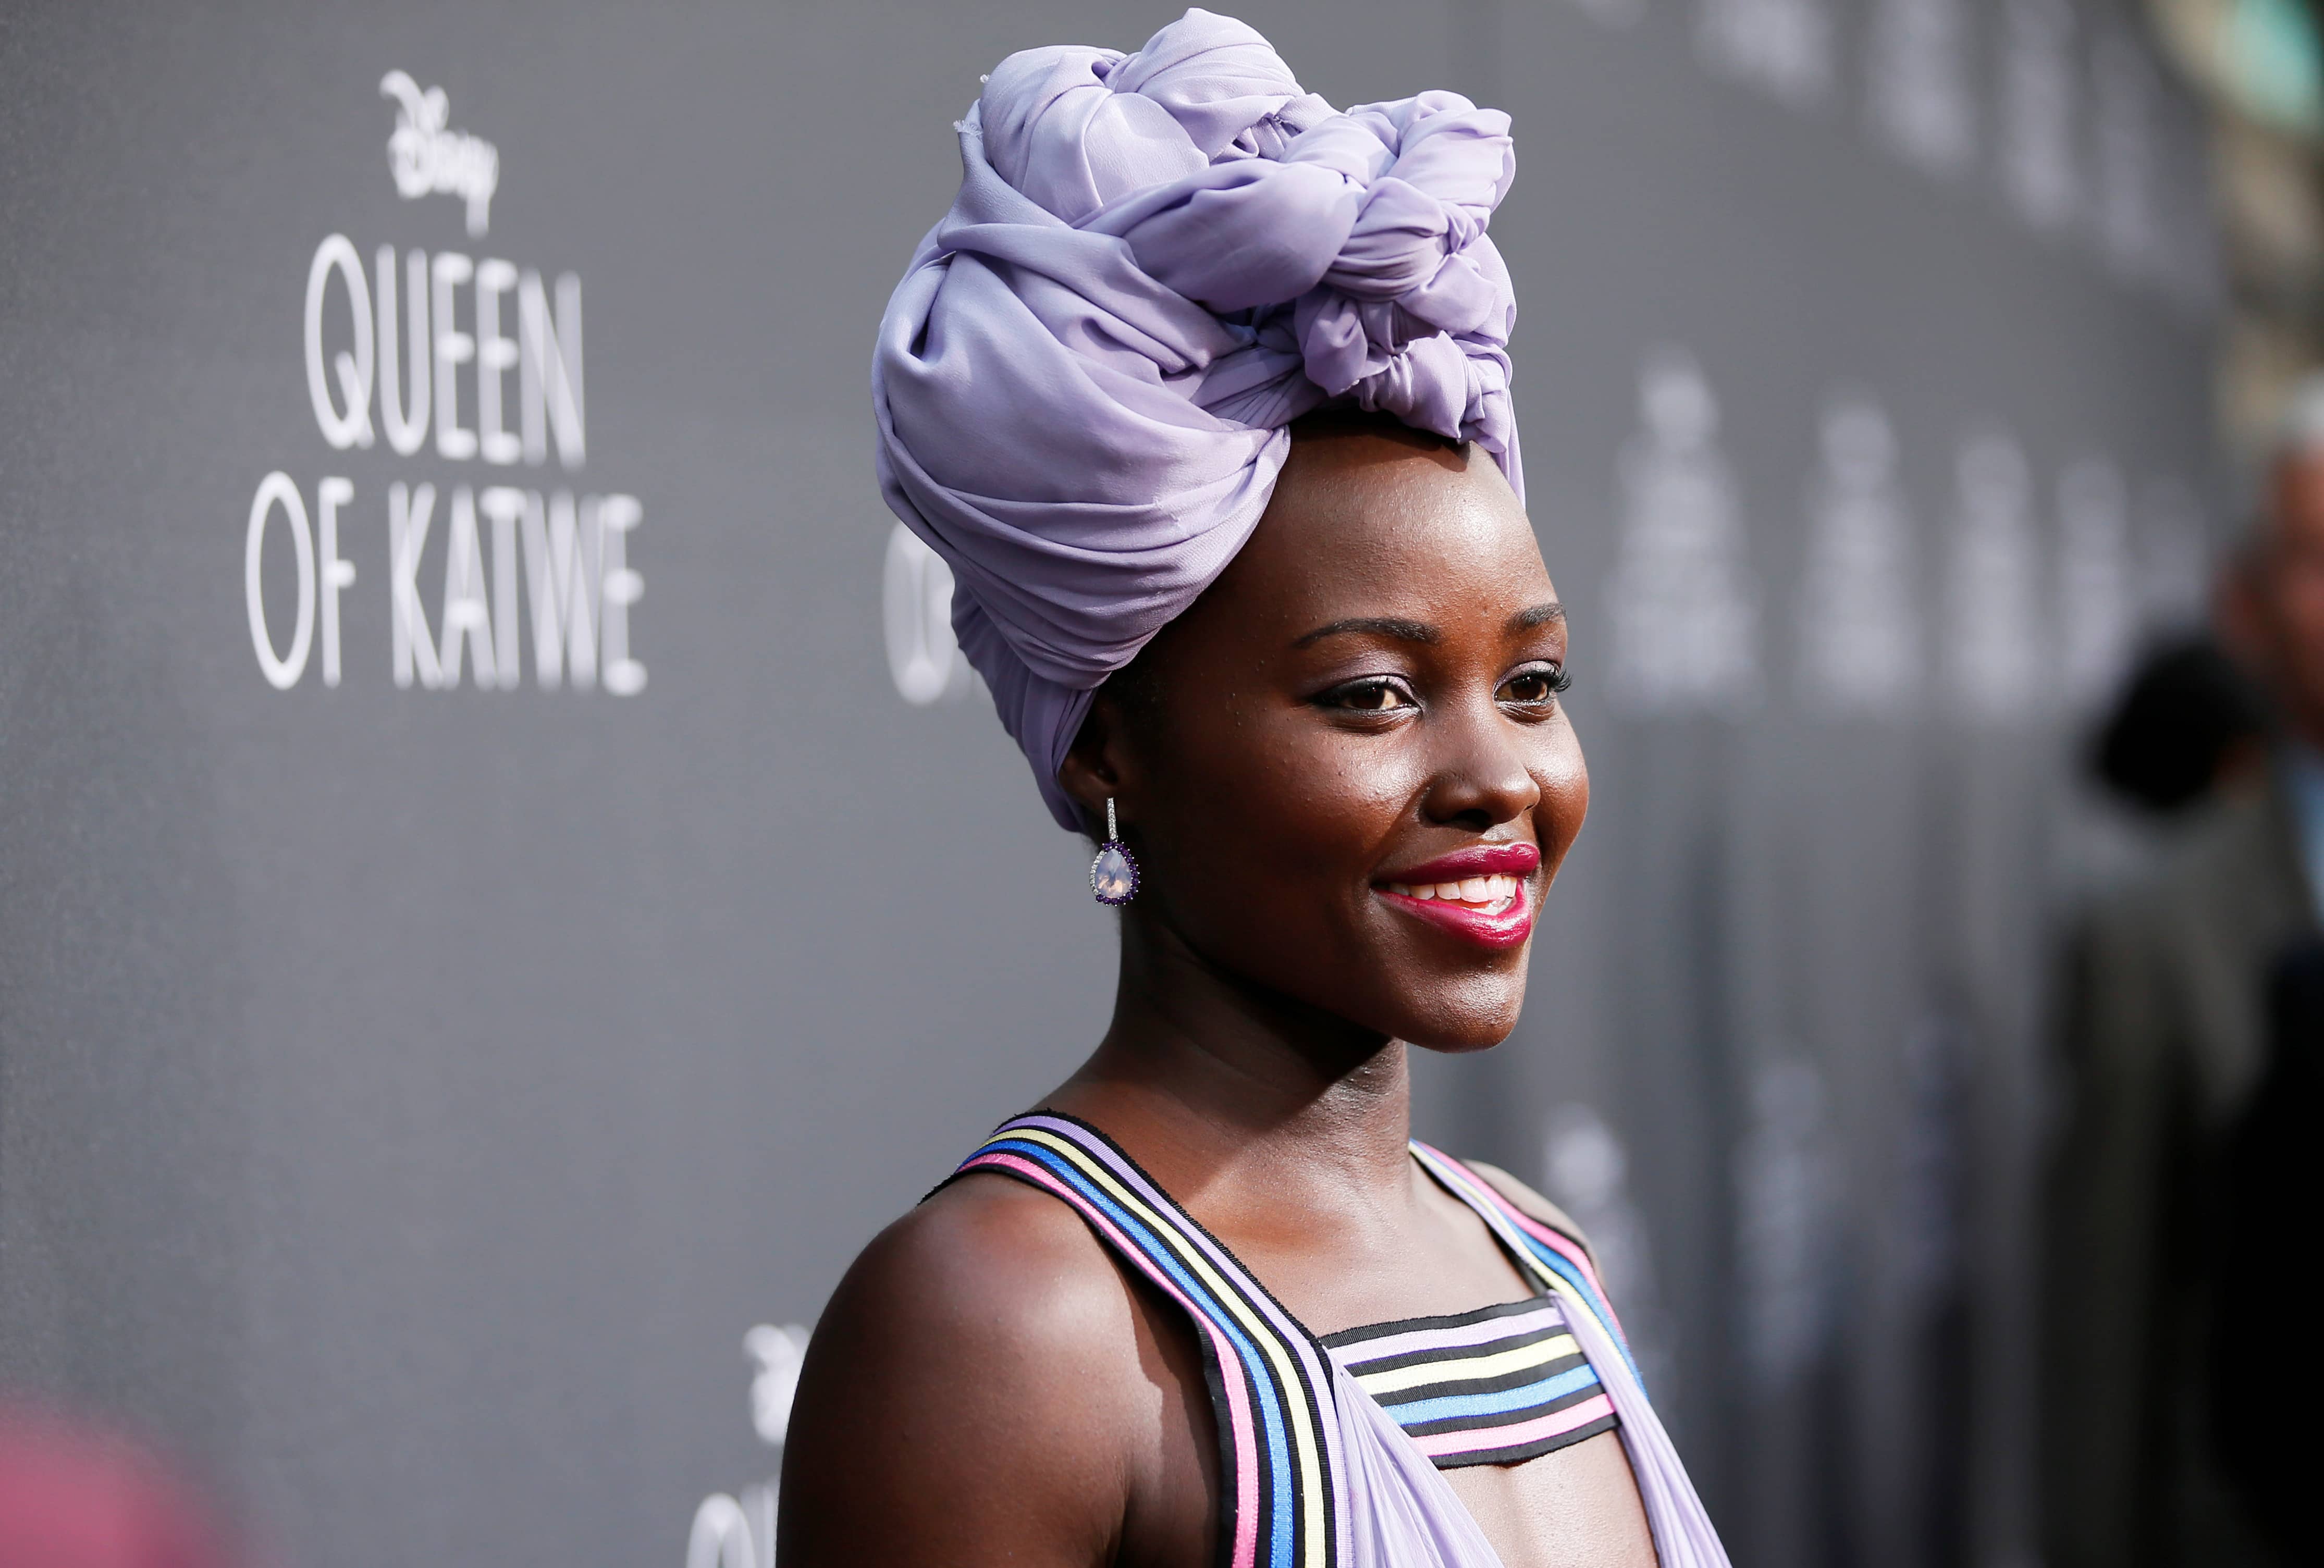 actor-lupita-nyongo-poses-during-the-los-angeles-premiere-of-queen-of-katwe-in-hollywood